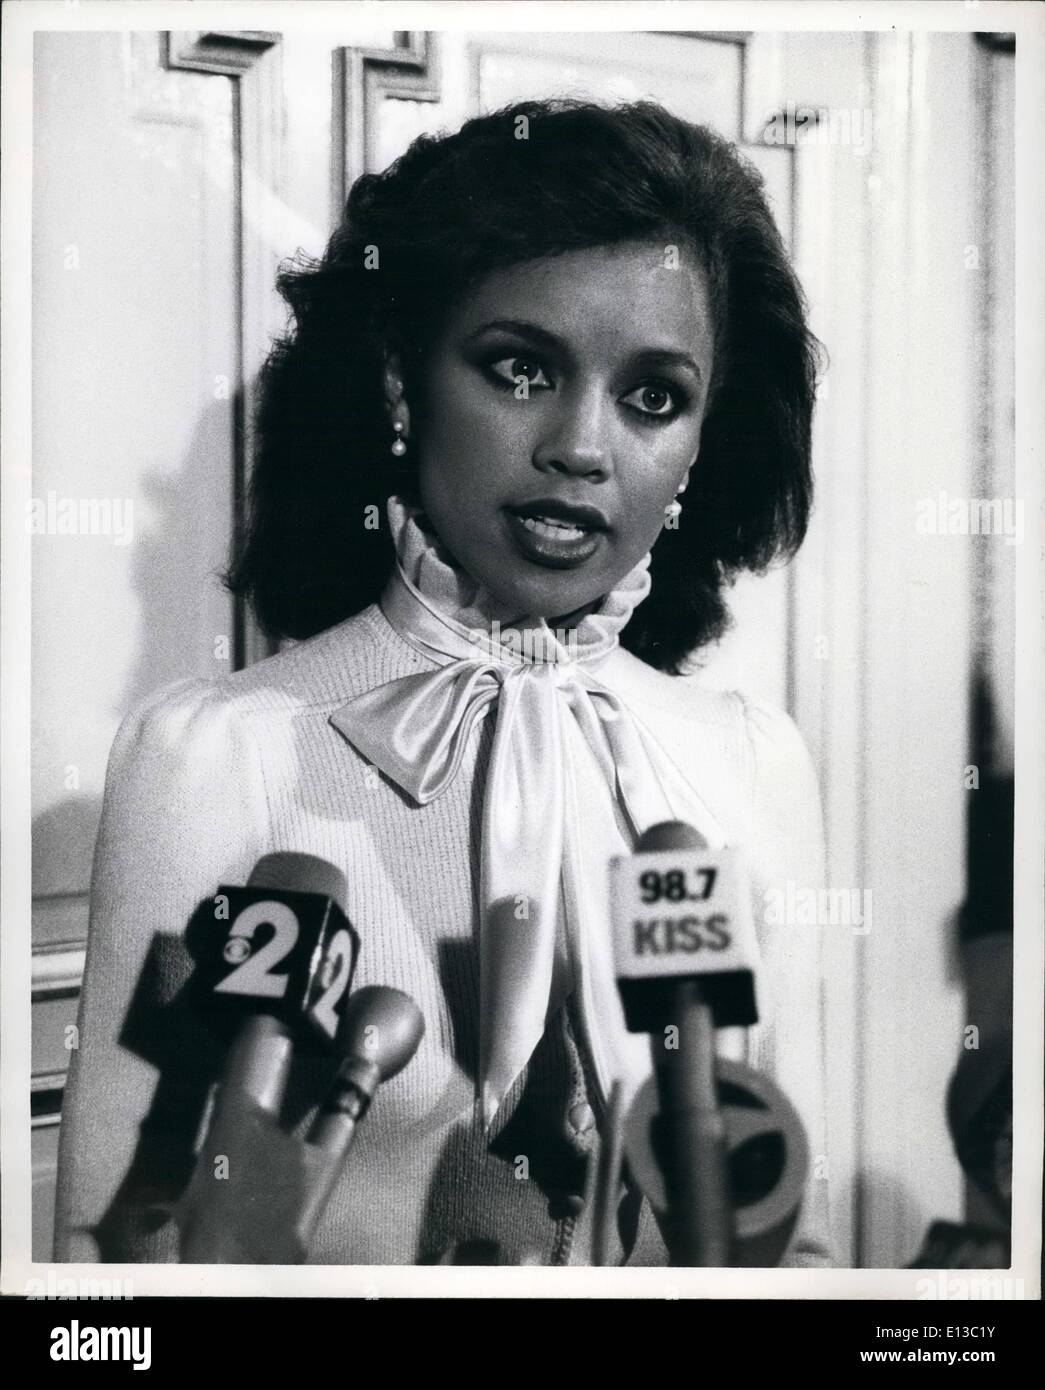 Feb. 29, 2012 - Vanessa Williams Becomes The First Black Miss America: Miss Vanessa Williams became the first black woman to win the Miss America beauty pageant in the 63 year history of the event in Atlantic City on September 18th 1983. Miss Williams is a 20 year old musical theater major at Syracuse University in New York State. photo shows. Miss Williams at a press conference in New York. Stock Photo